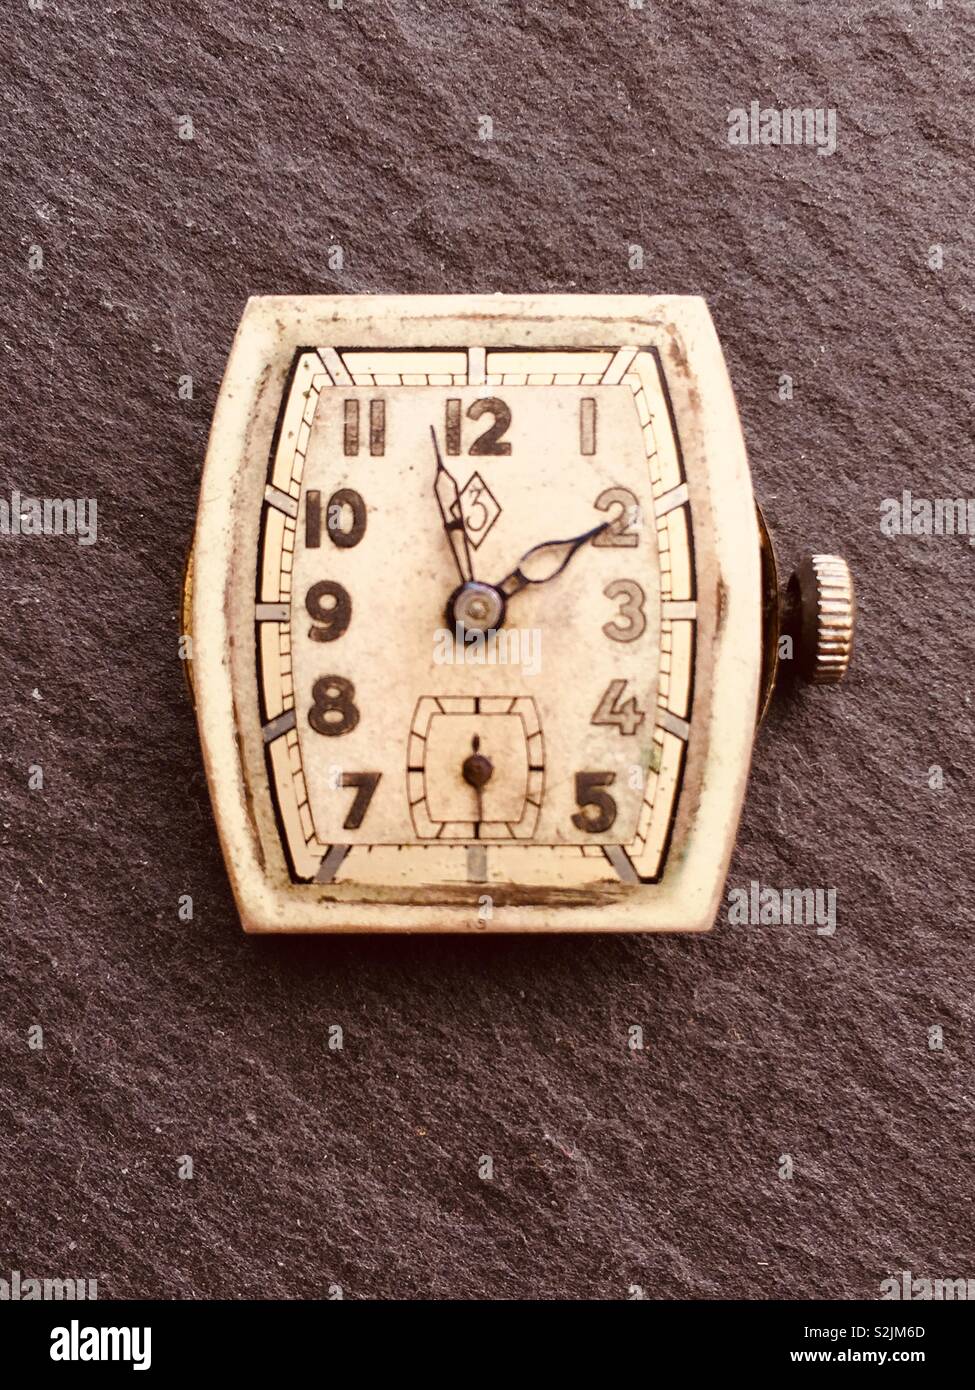 Vintage Art Deco Style Manual wind men’s watch face close up Stock Photo